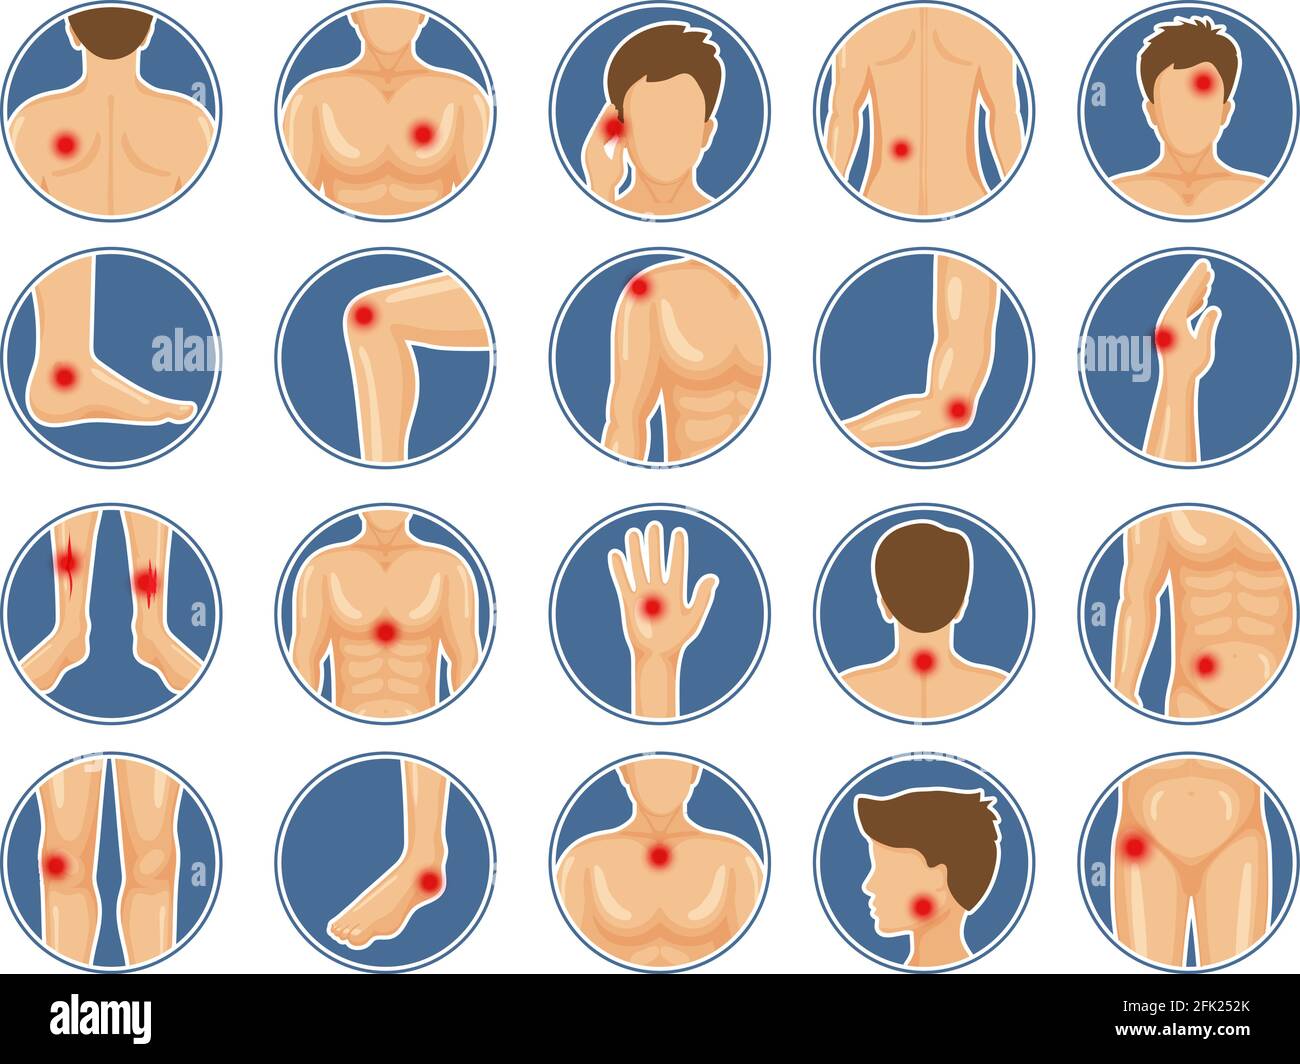 Shoulder hurt Cut Out Stock Images & Pictures - Alamy